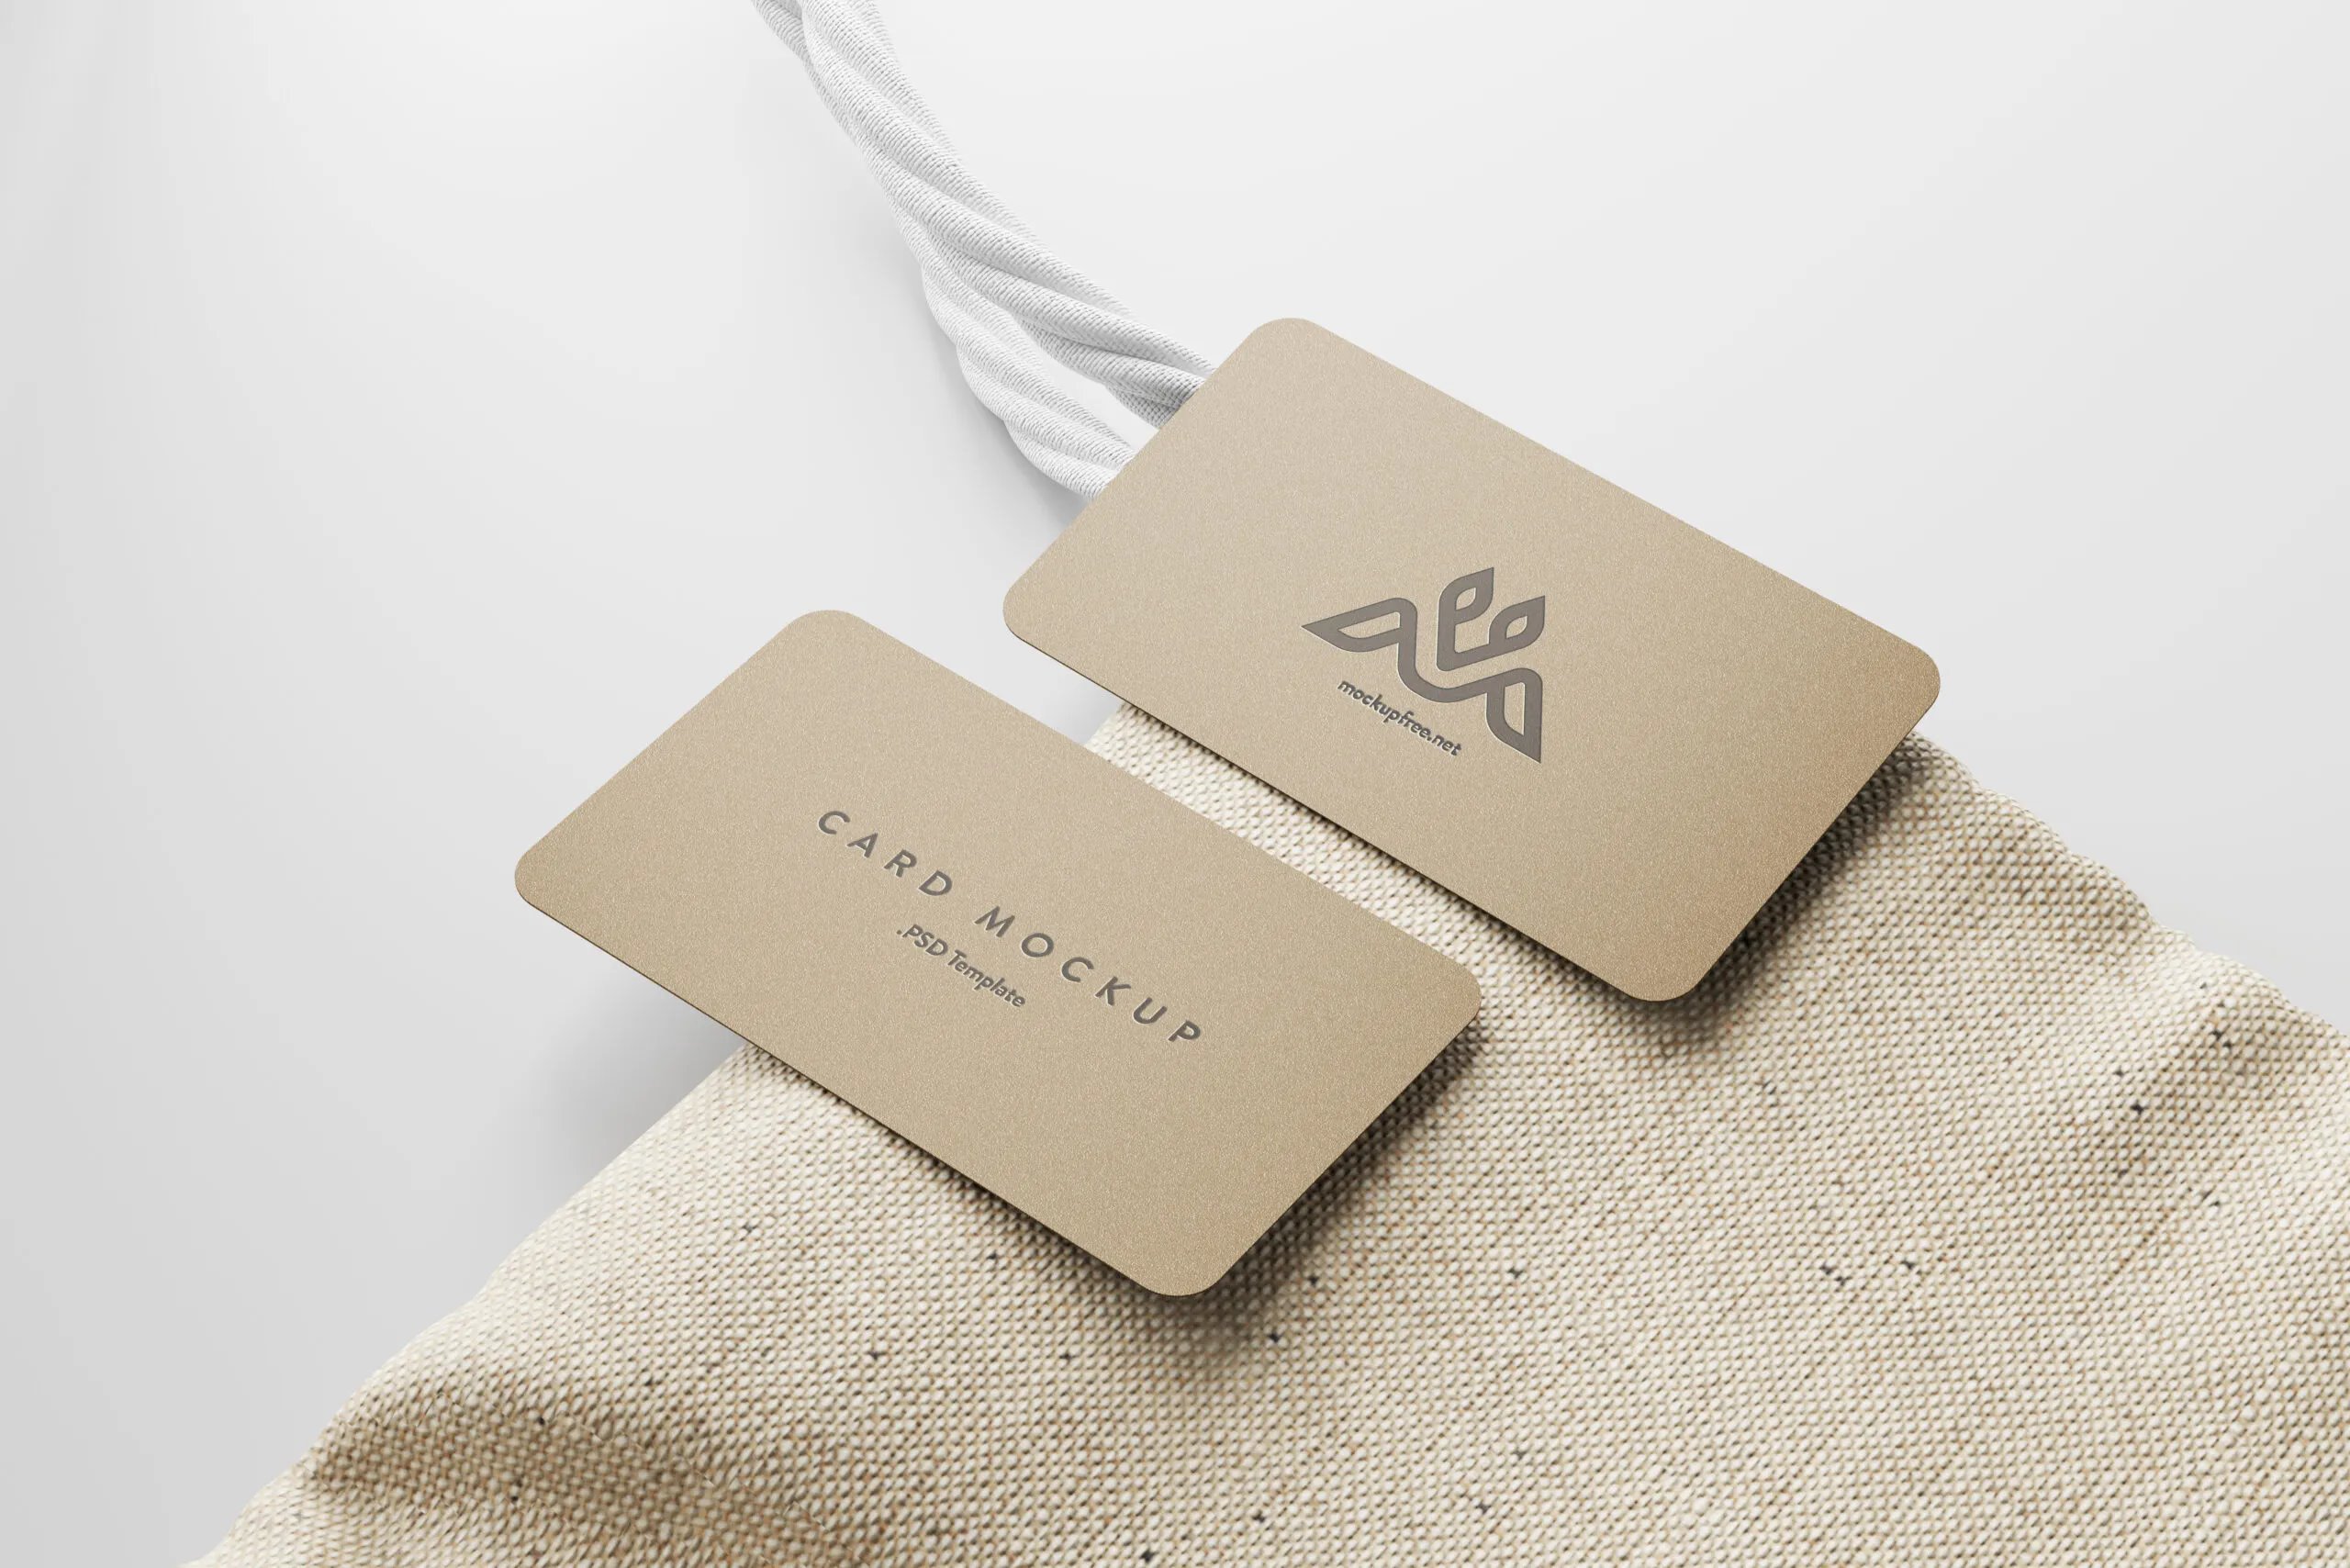 5 Business Cards Mockups On Burlap Sack in Perspective Sights FREE PSD